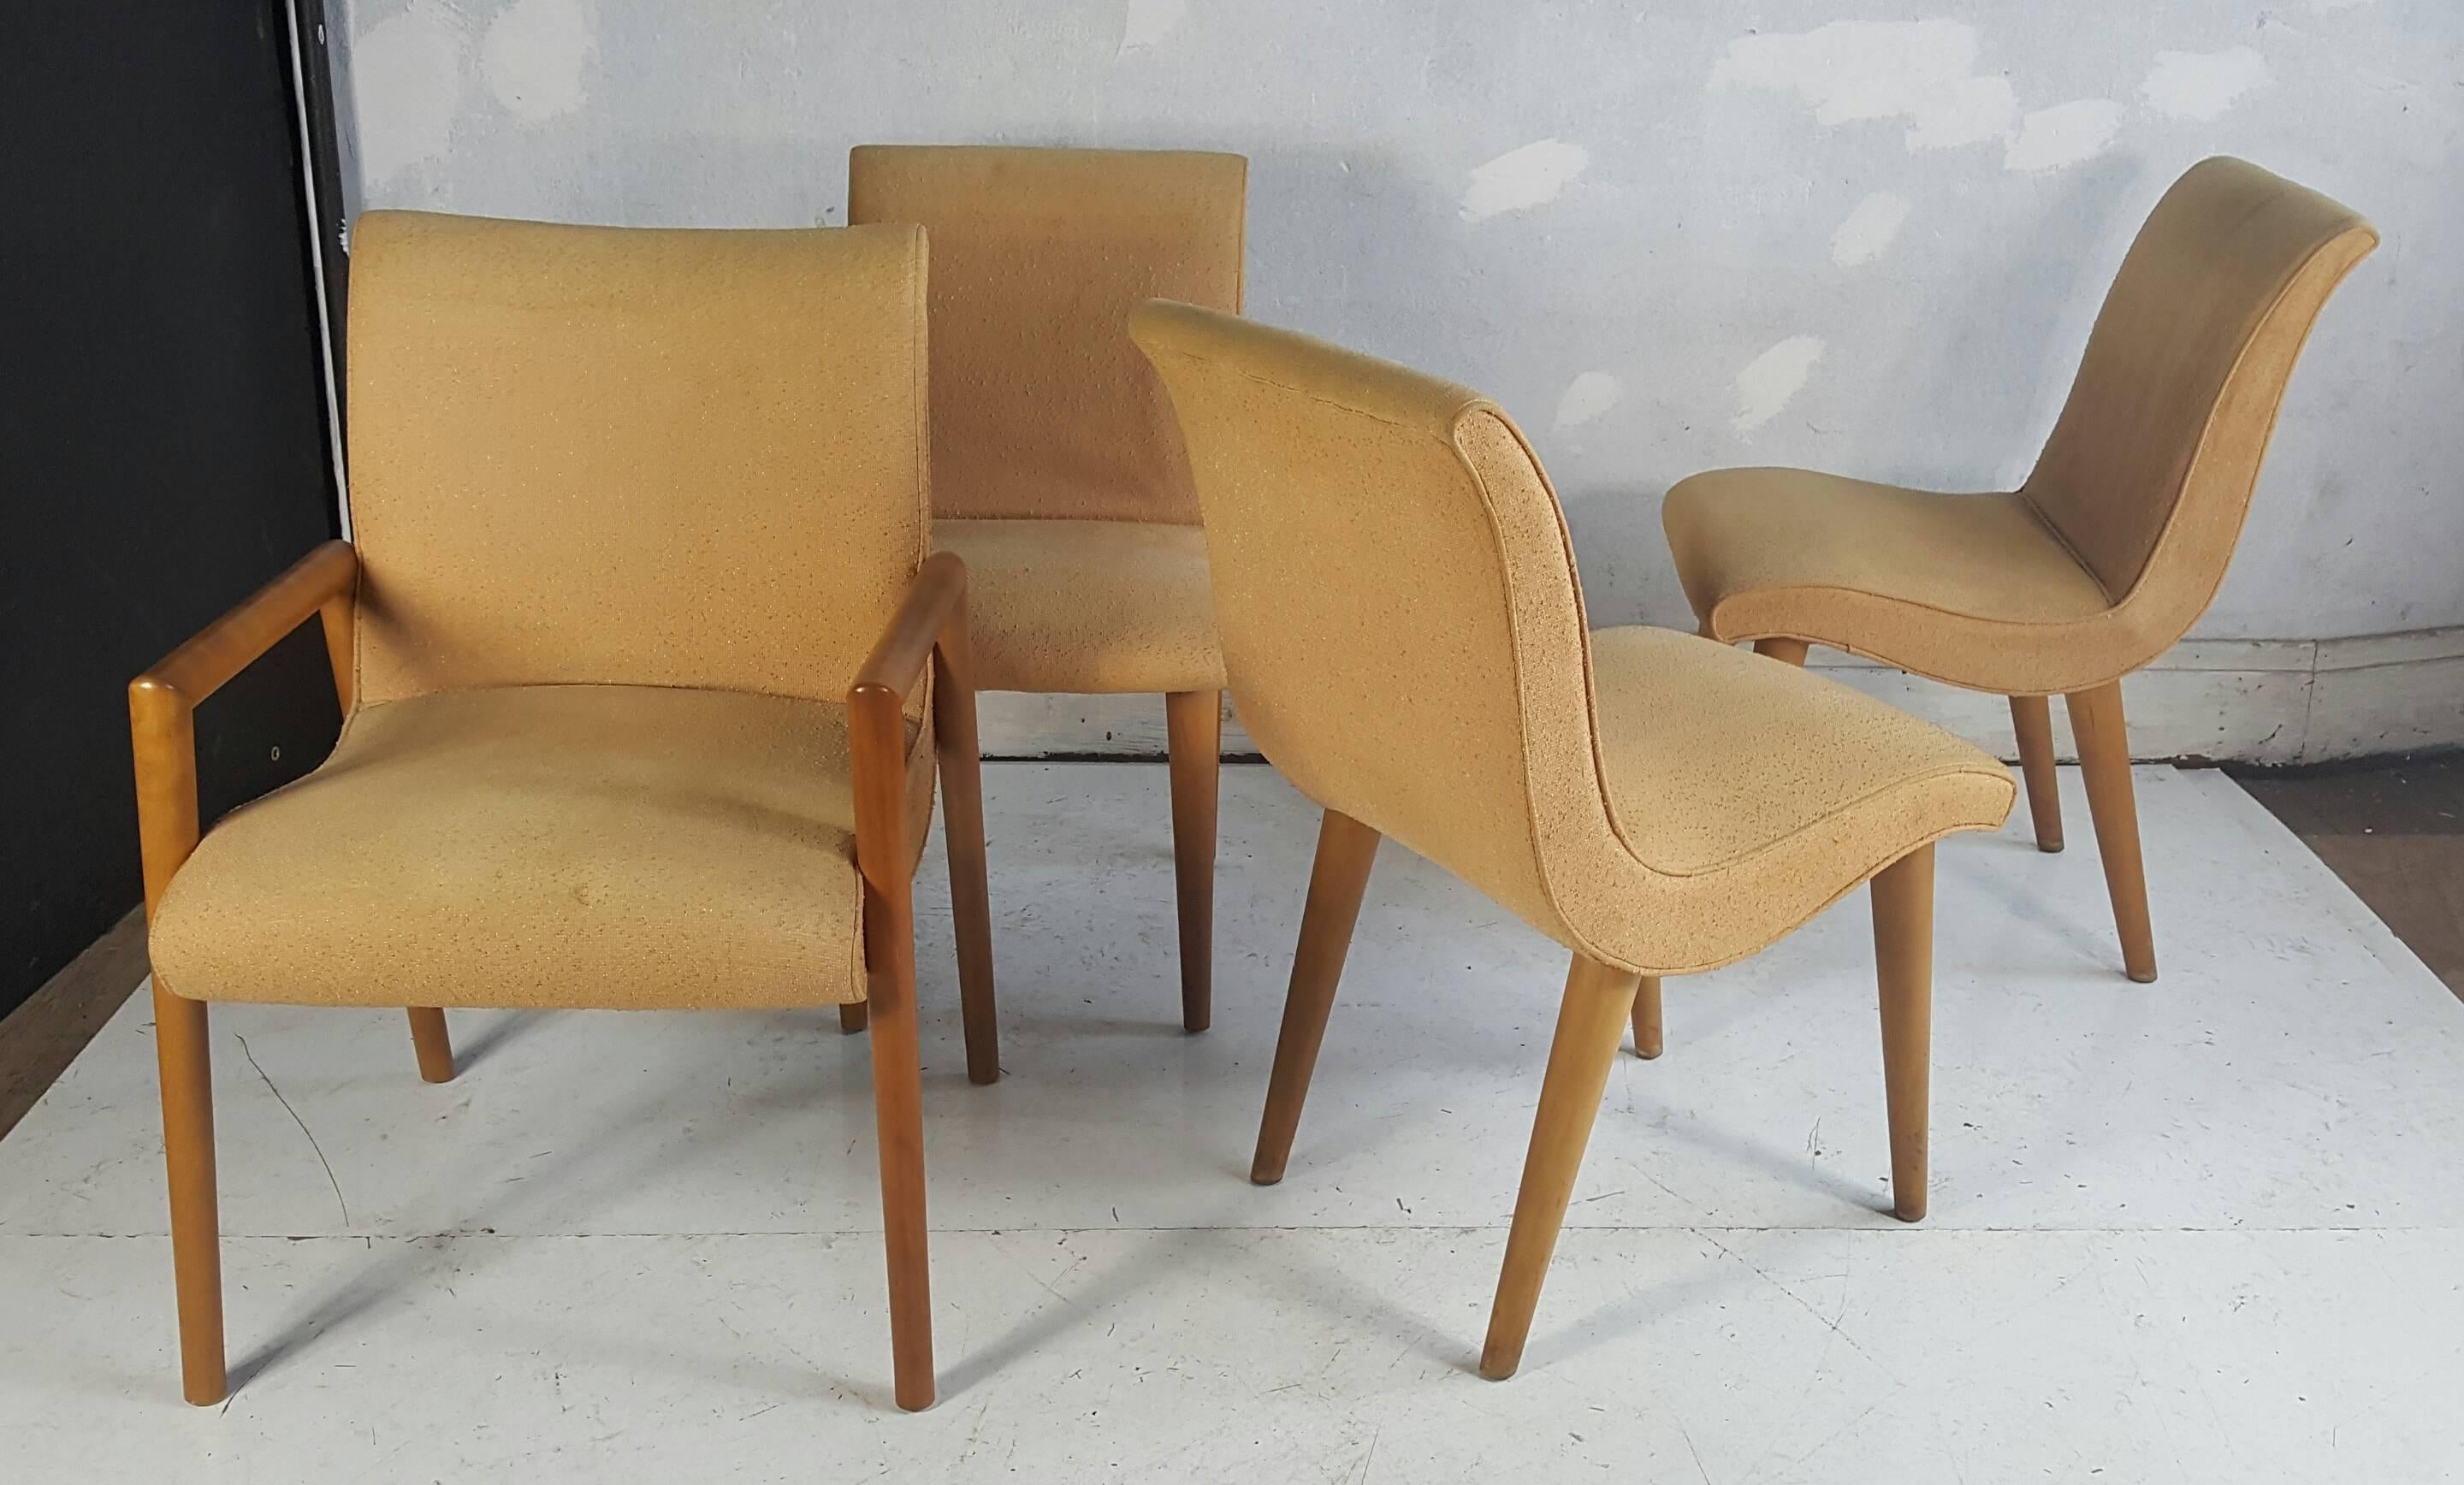 Birch Set of Four Russel Wright for Conant Ball Dining Chairs, Modernist